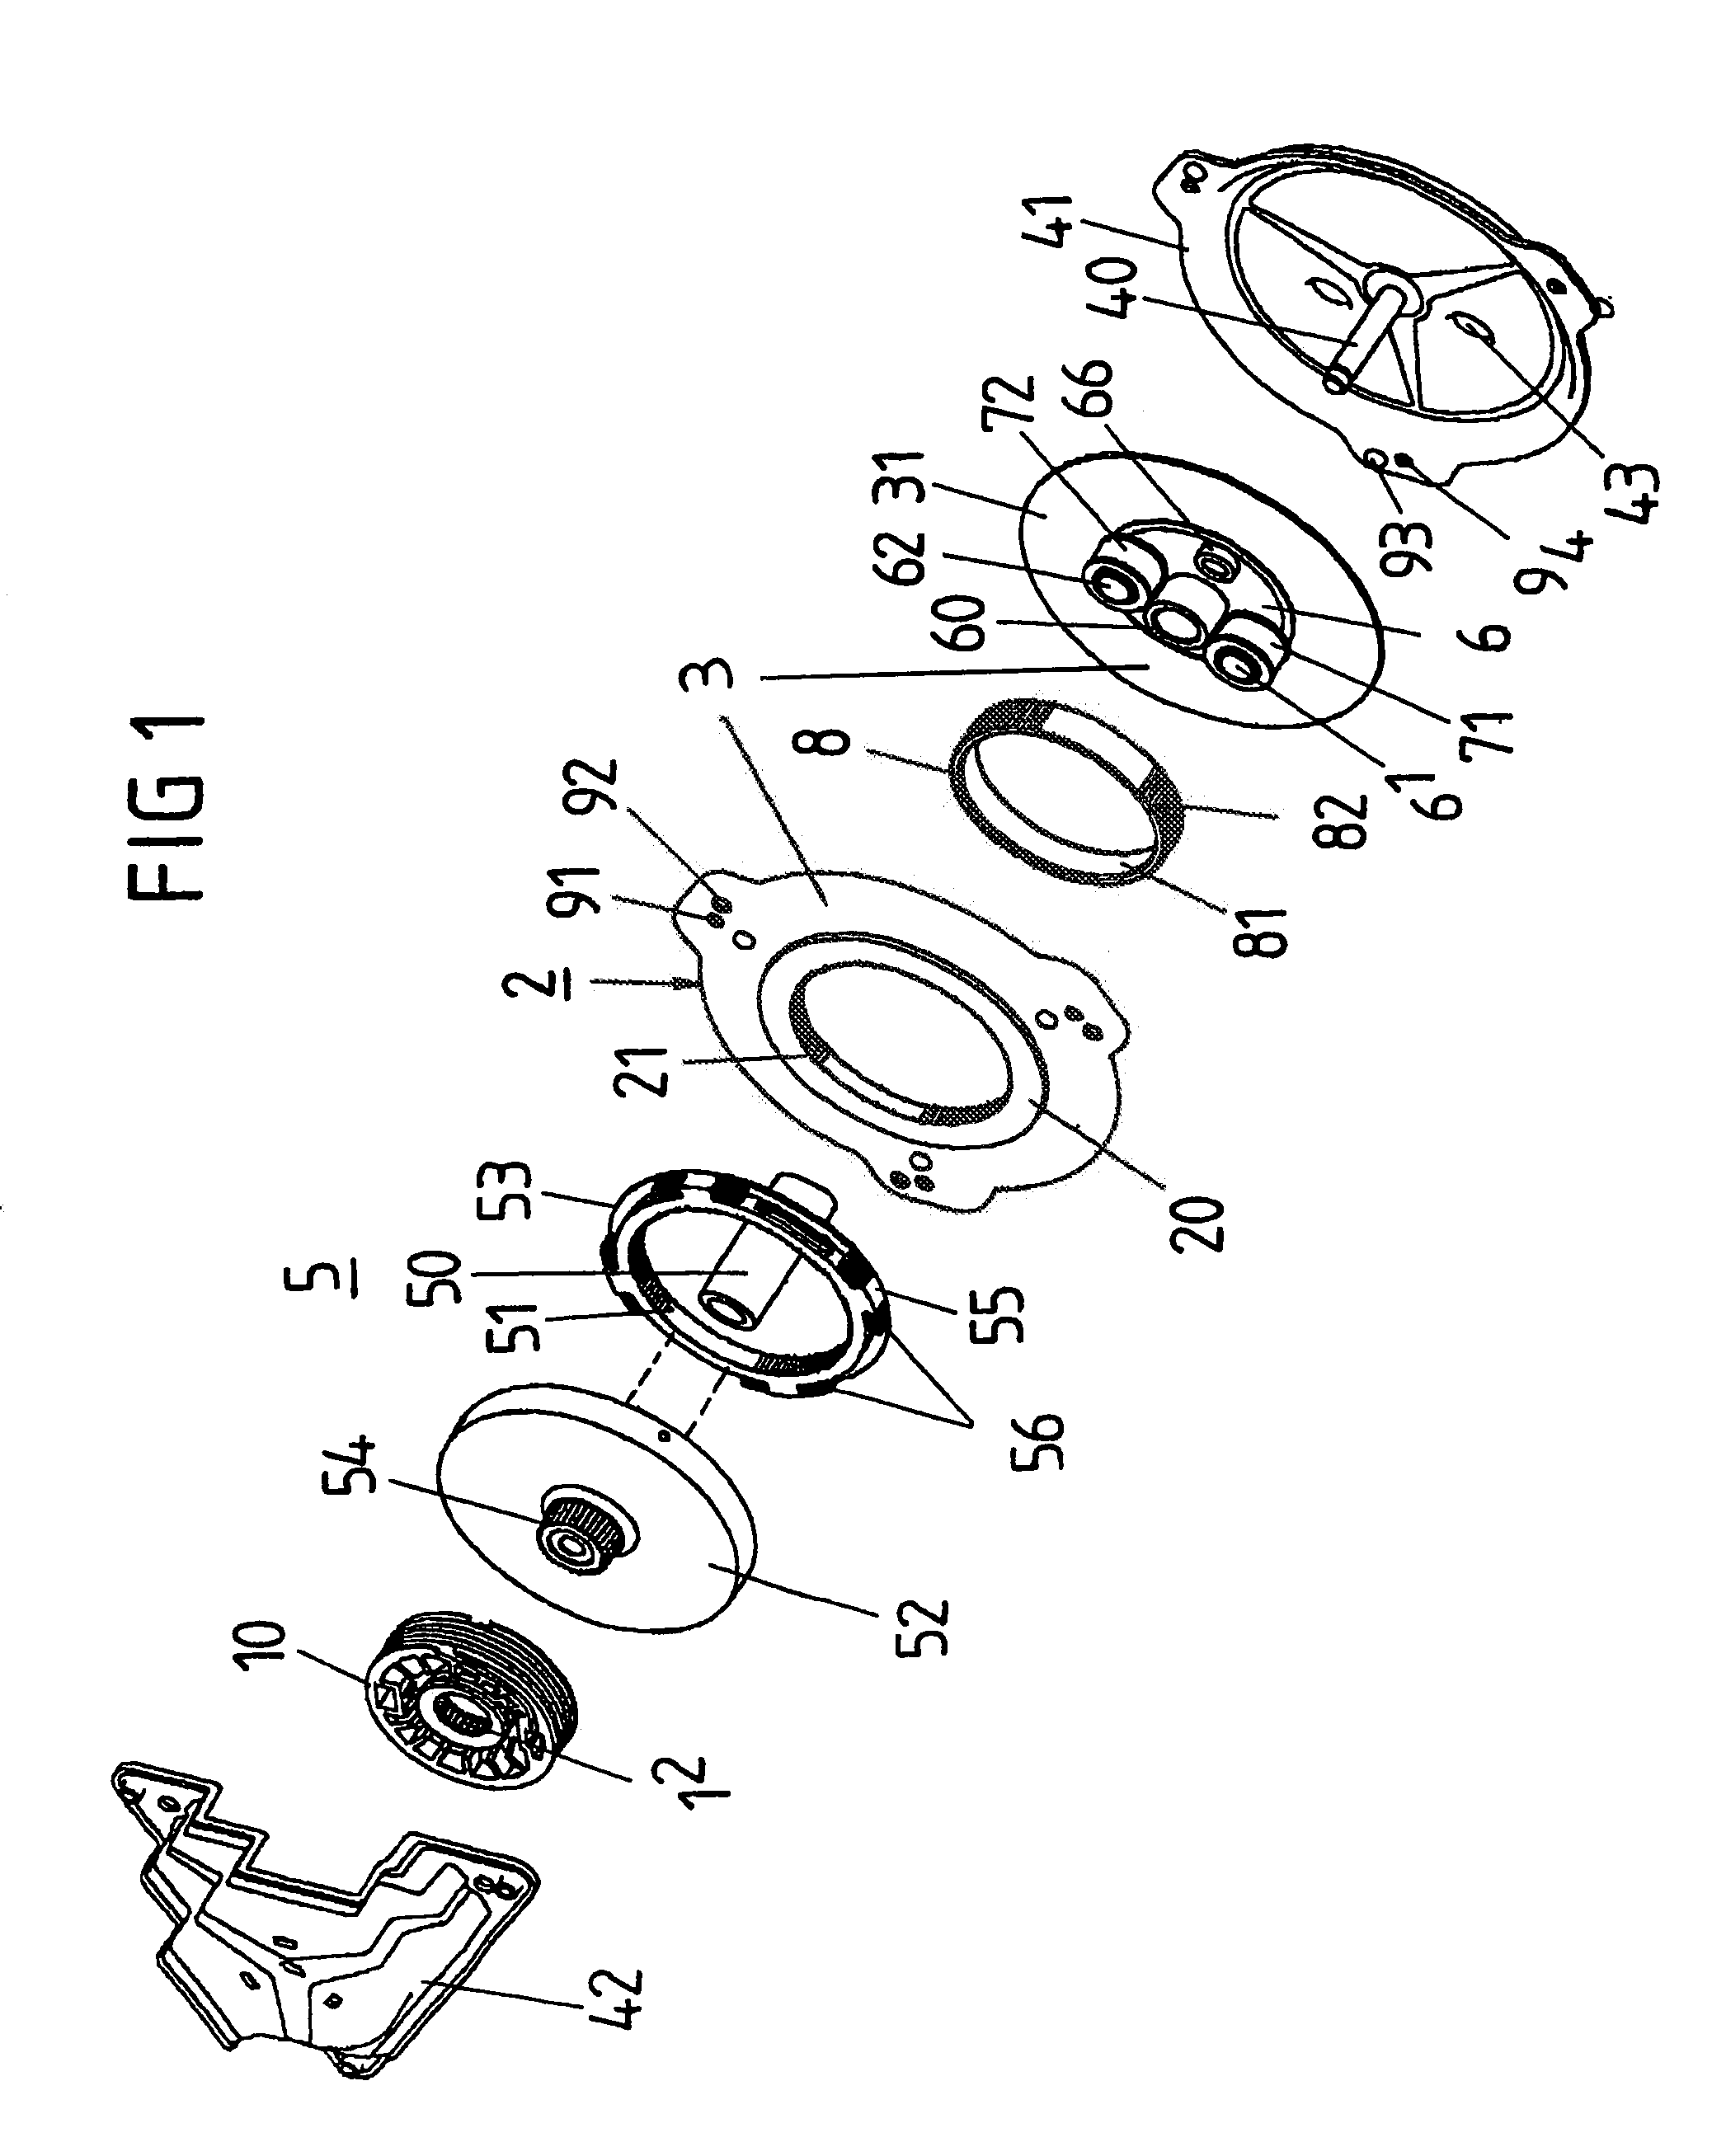 Drive system for regulating devices in motor vehicles